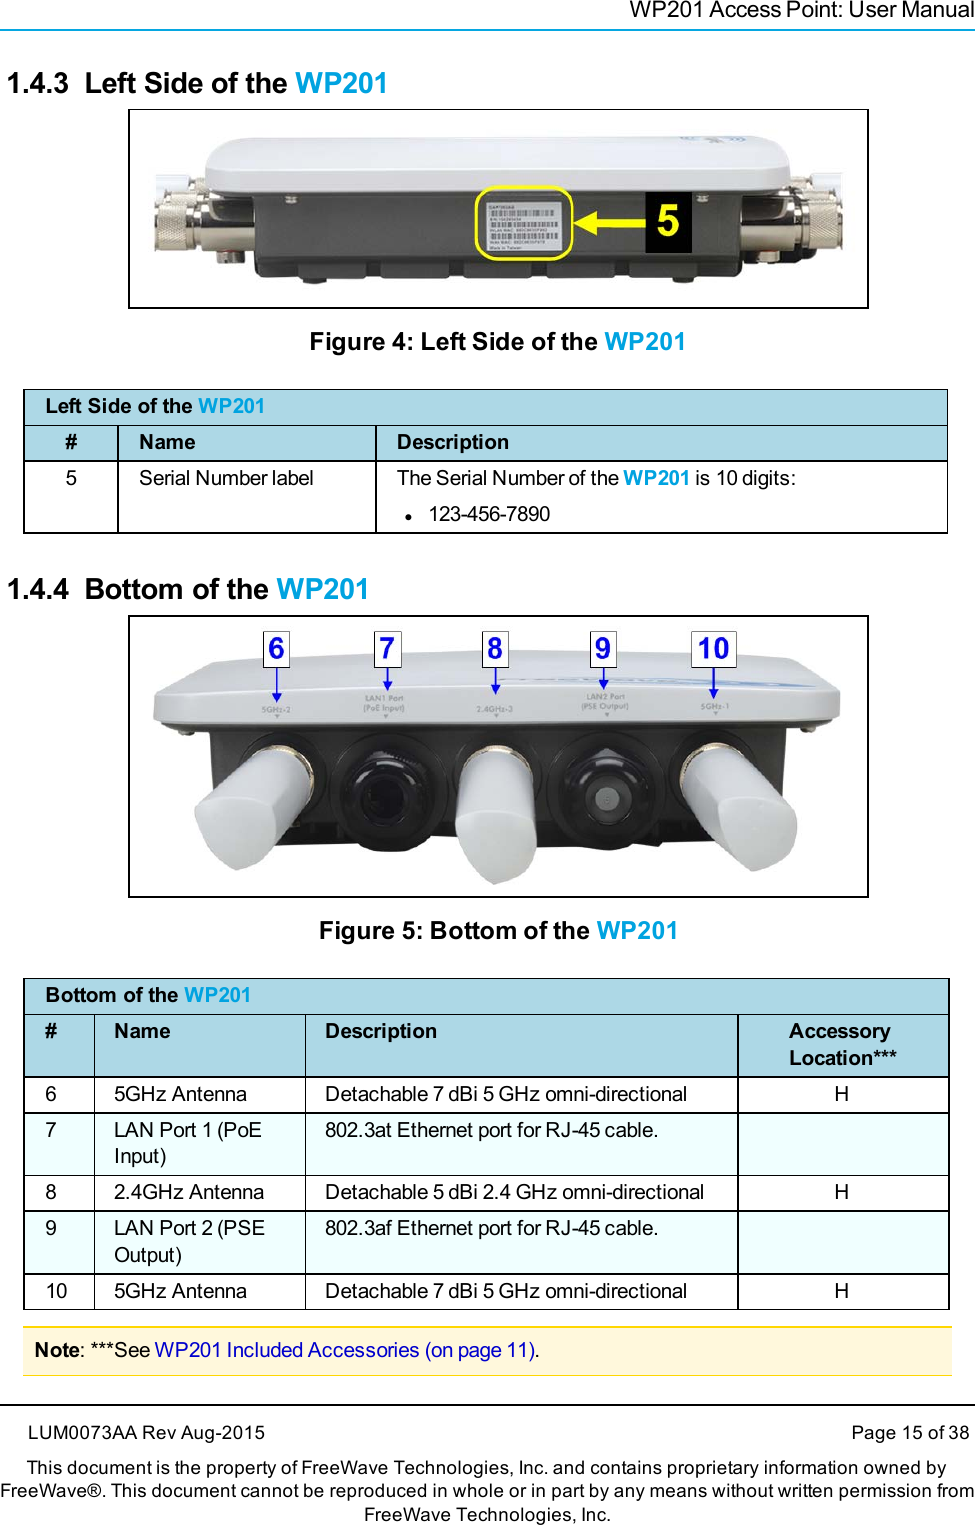 WP201 Access Point: User Manual1.4.3 Left Side of the WP201Figure 4: Left Side of the WP201Left Side of the WP201# Name Description5 Serial Number label The Serial Number of the WP201 is 10 digits:l123-456-78901.4.4 Bottom of the WP201Figure 5: Bottom of the WP201Bottom of the WP201# Name Description AccessoryLocation***6 5GHz Antenna Detachable 7 dBi 5 GHz omni-directional H7 LAN Port 1 (PoEInput)802.3at Ethernet port for RJ-45 cable.8 2.4GHz Antenna Detachable 5 dBi 2.4 GHz omni-directional H9 LAN Port 2 (PSEOutput)802.3af Ethernet port for RJ-45 cable.10 5GHz Antenna Detachable 7 dBi 5 GHz omni-directional HNote: ***See WP201 Included Accessories (on page 11).LUM0073AA Rev Aug-2015 Page 15 of 38This document is the property of FreeWave Technologies, Inc. and contains proprietary information owned byFreeWave®. This document cannot be reproduced in whole or in part by any means without written permission fromFreeWave Technologies, Inc.